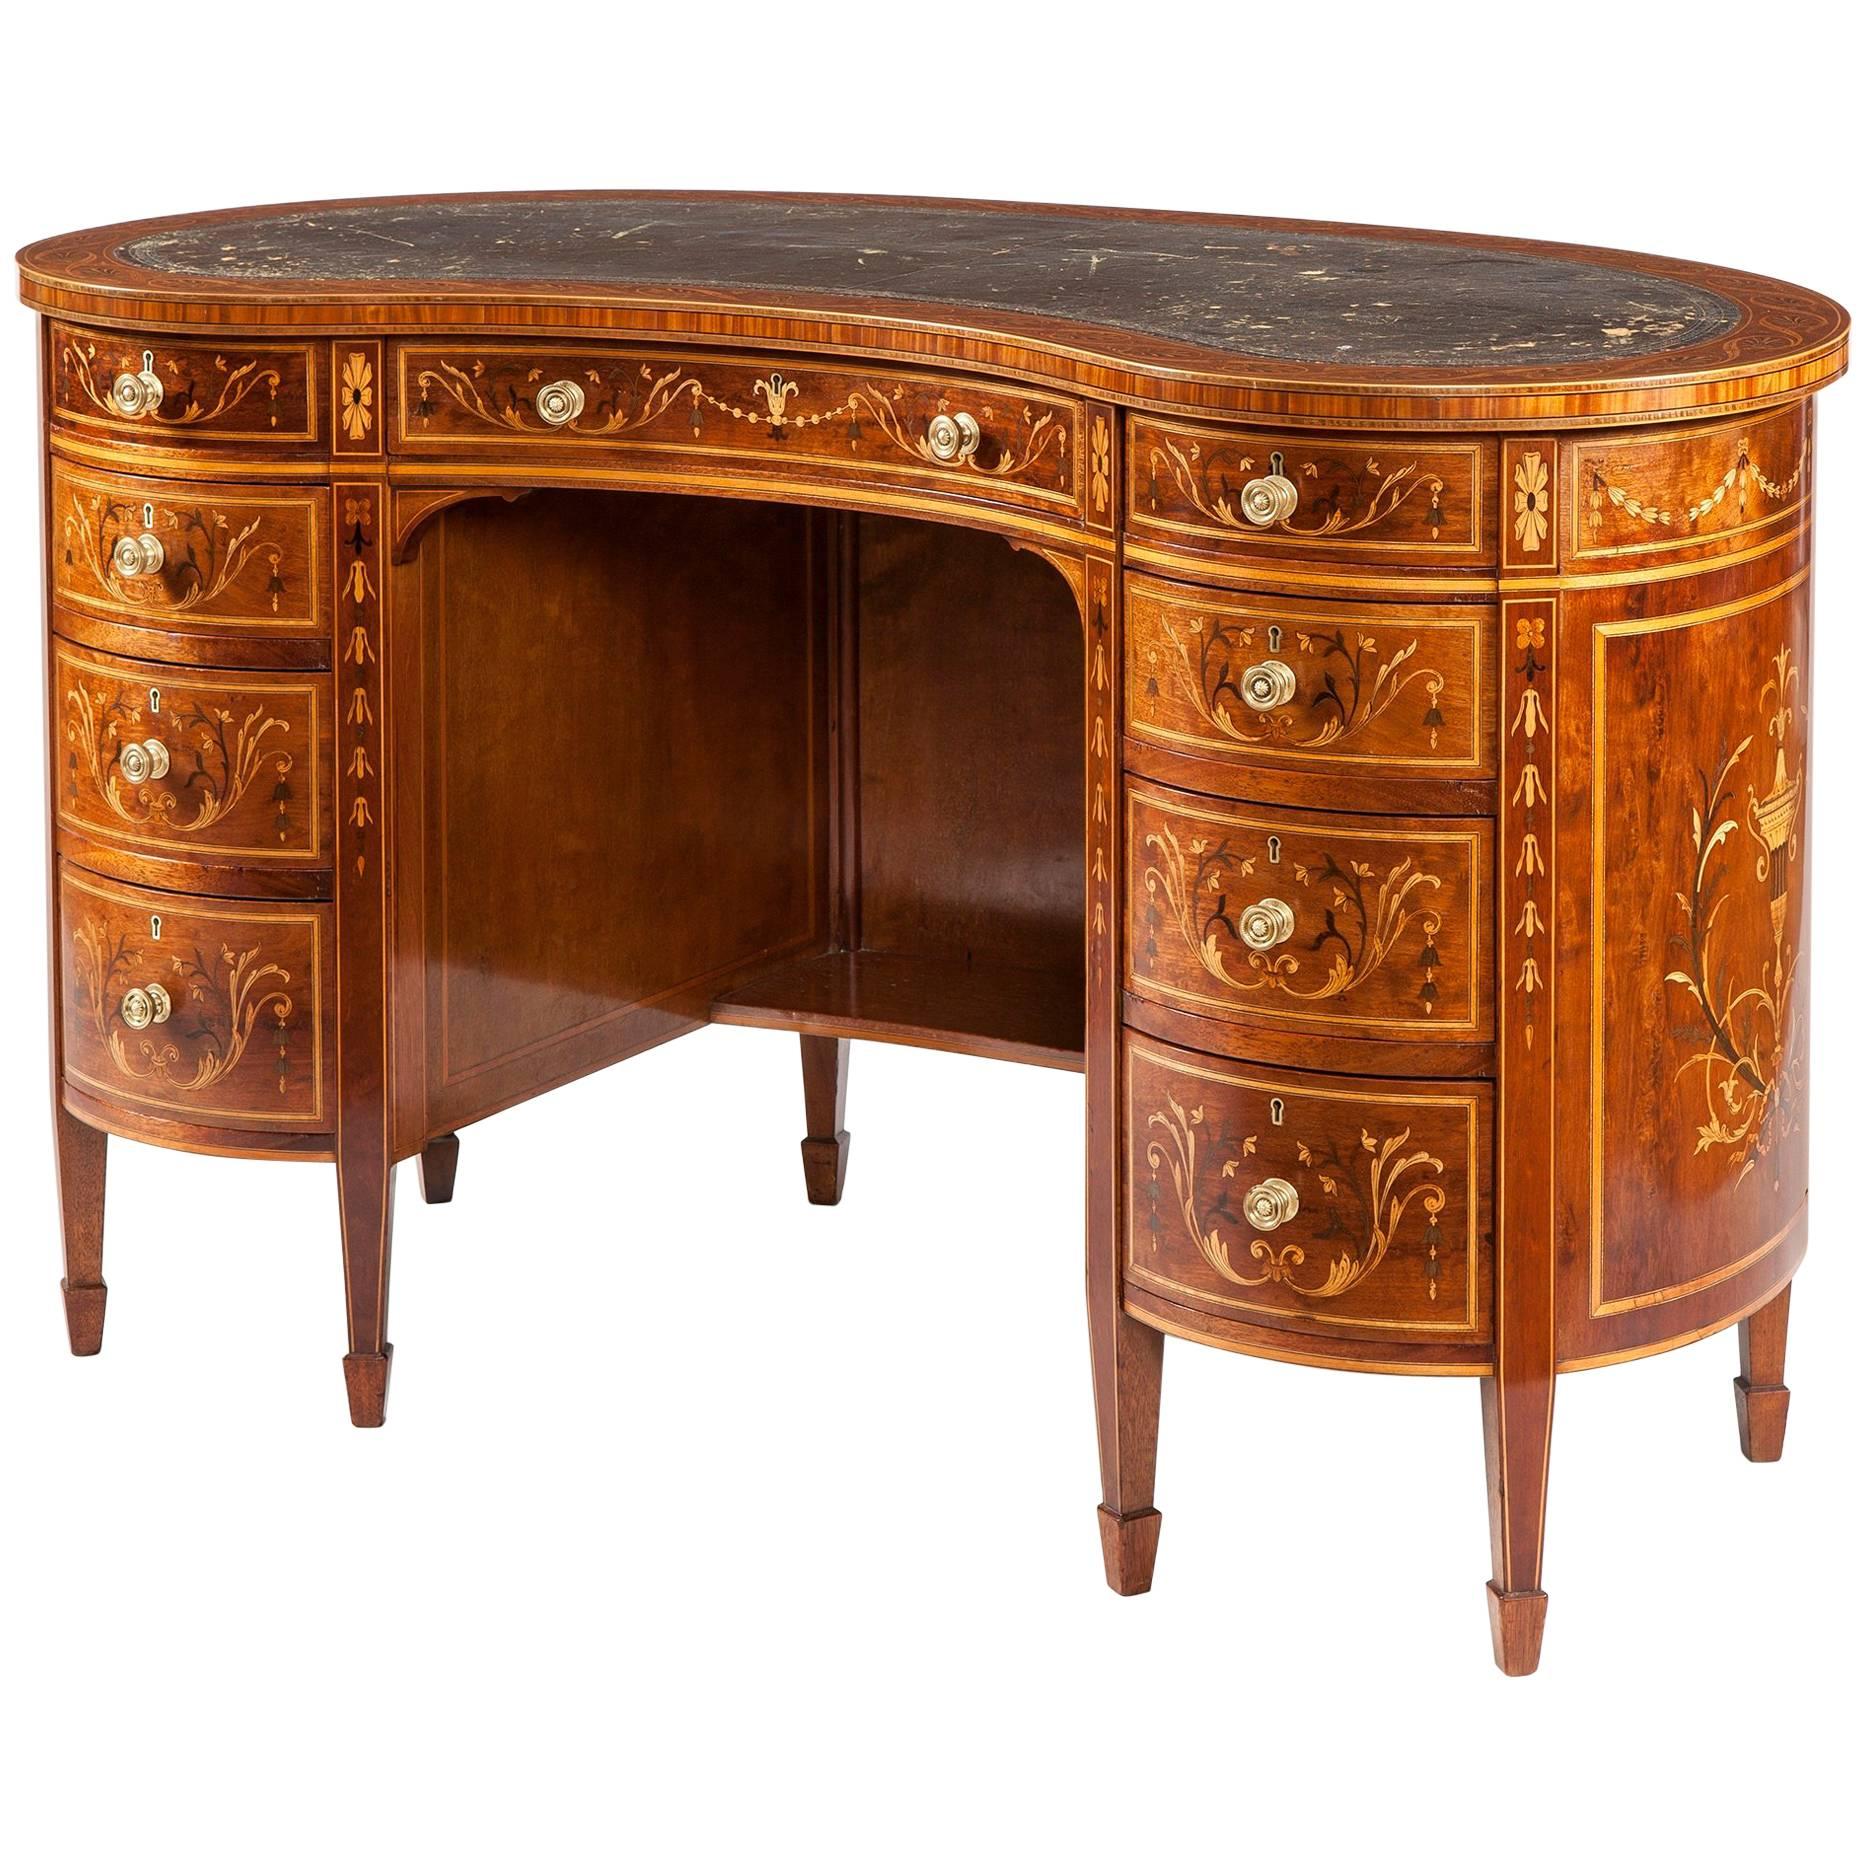 Neoclassical Inlaid Kidney Shaped Desk